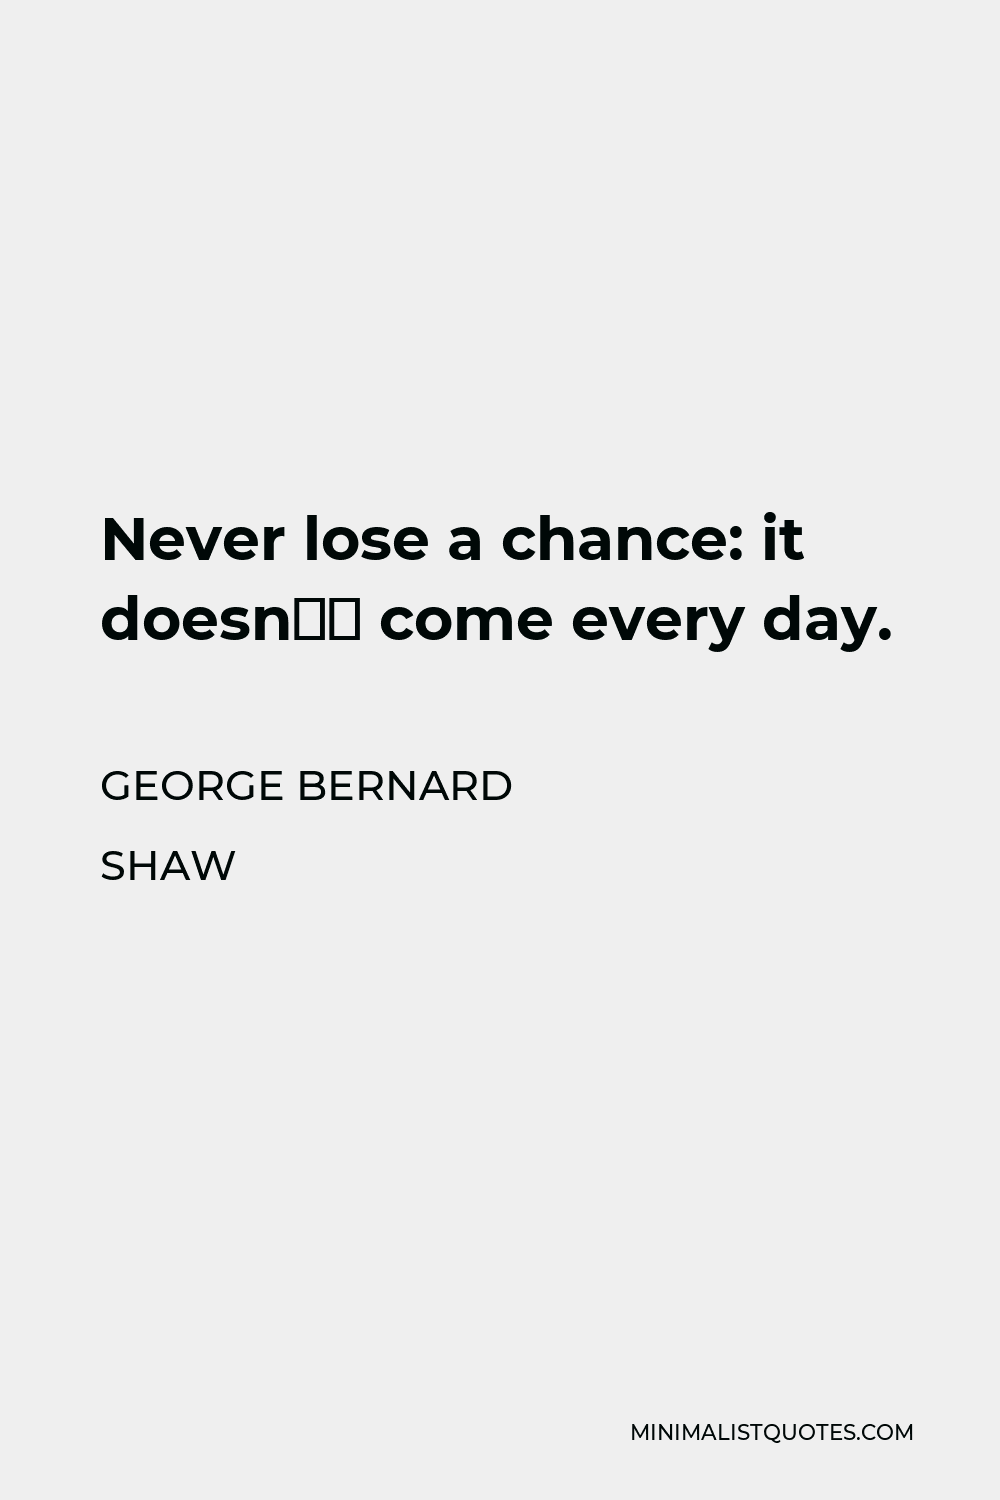 George Bernard Shaw Quote - Never lose a chance: it doesn’t come every day.